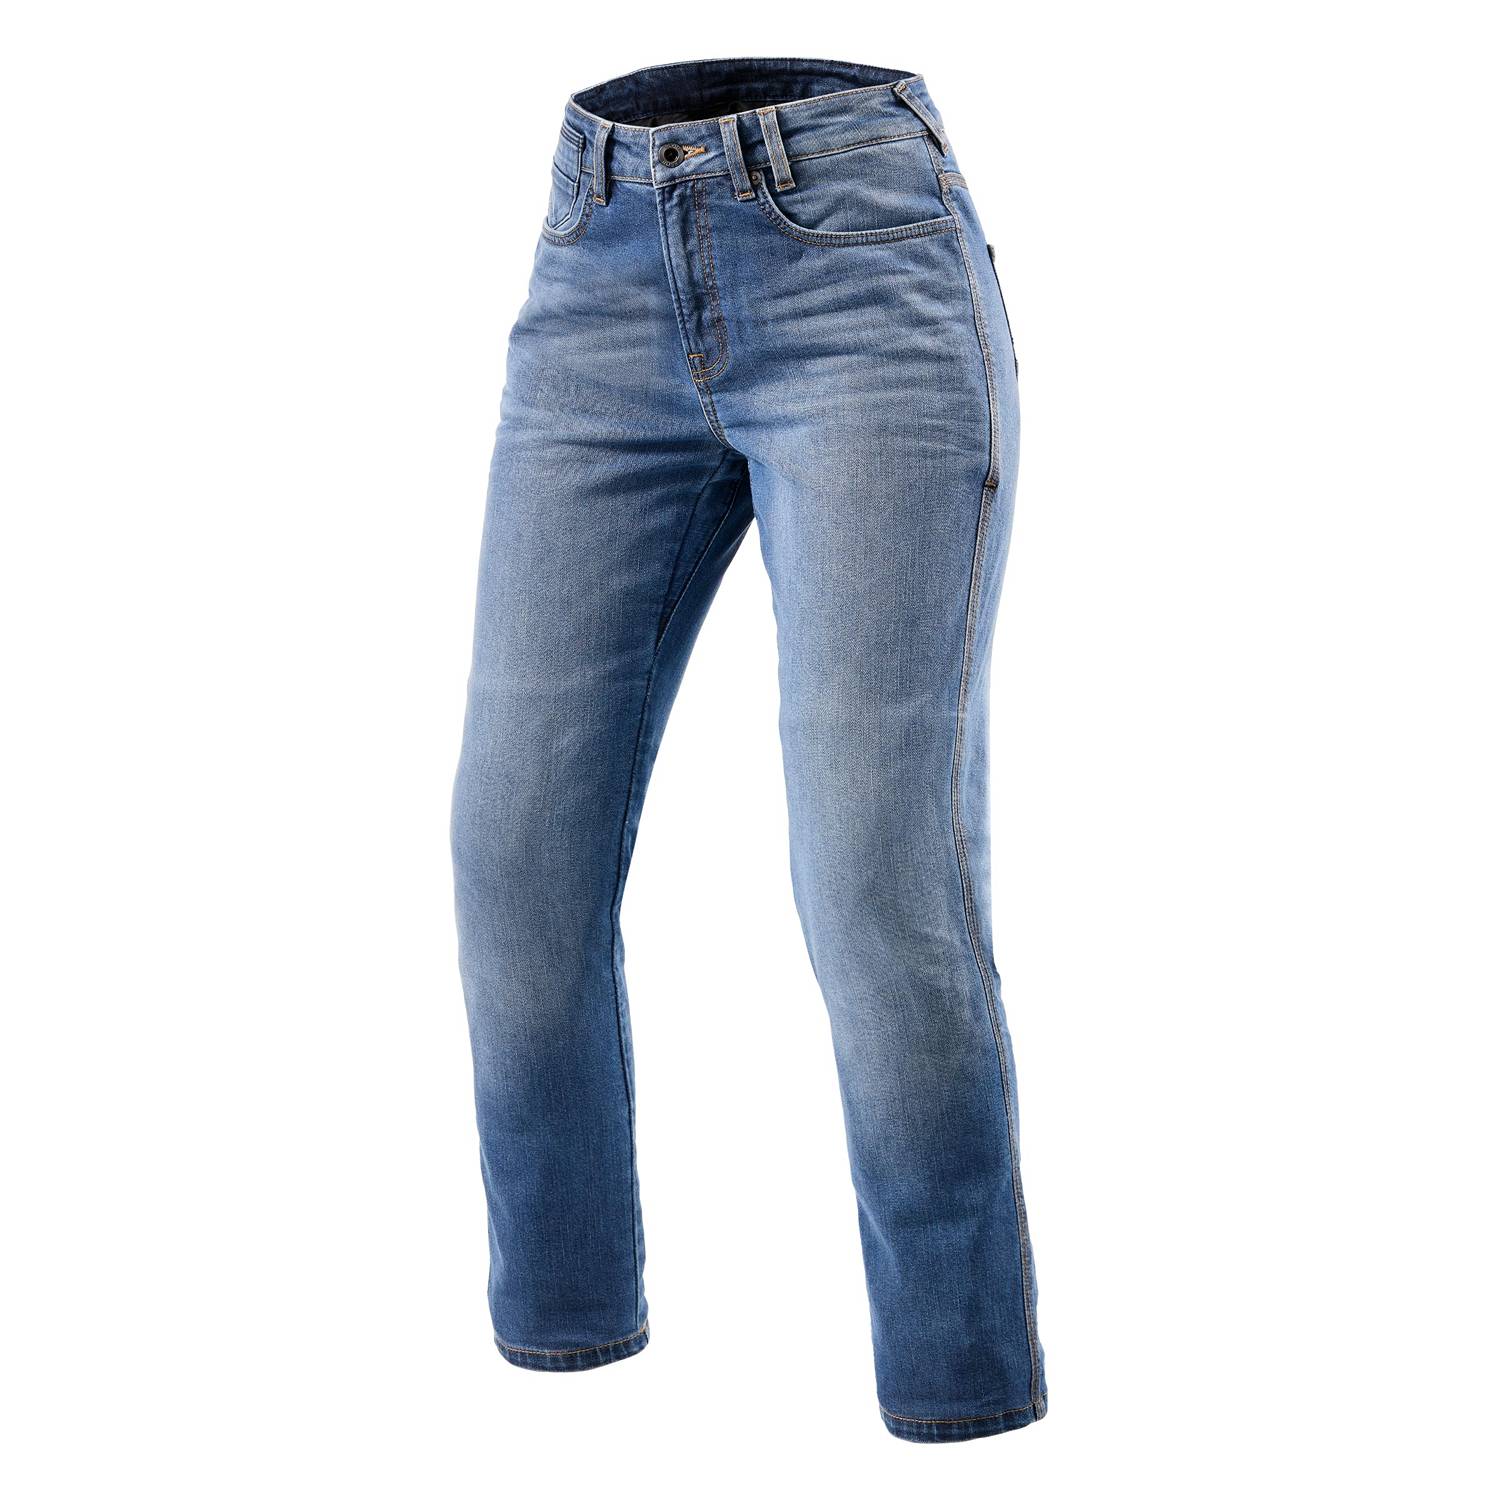 Image of EU REV'IT! Jeans Victoria 2 Ladies SF Classic Blue Used Motorcycle Jeans Taille L30/W26